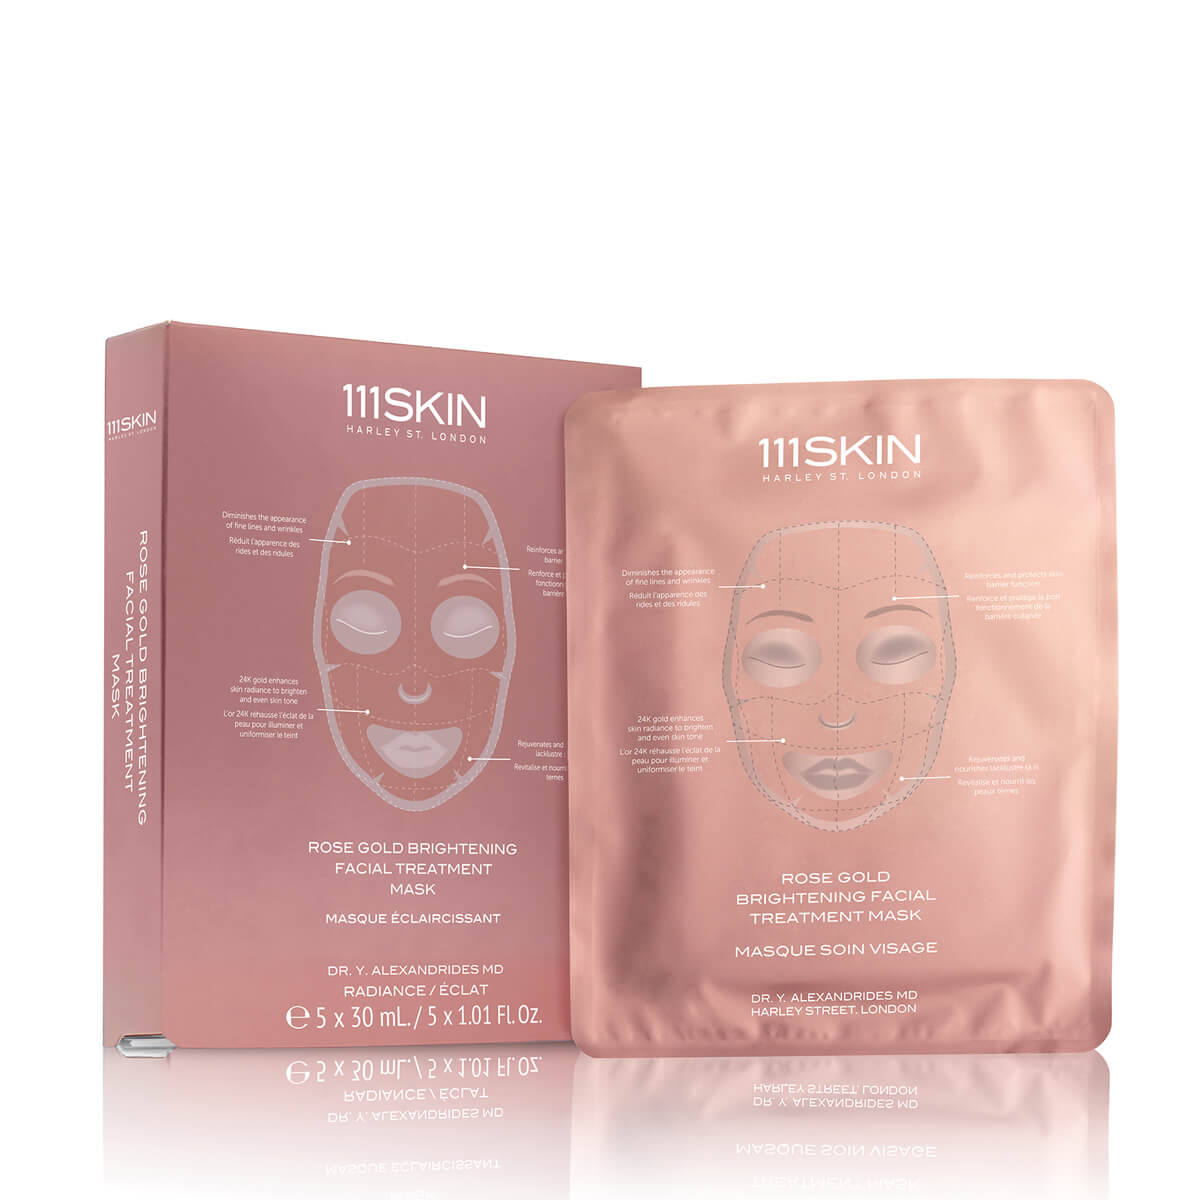 Rose Gold Brightening Facial Treatment Mask -- Box of 5 | Pack of 3